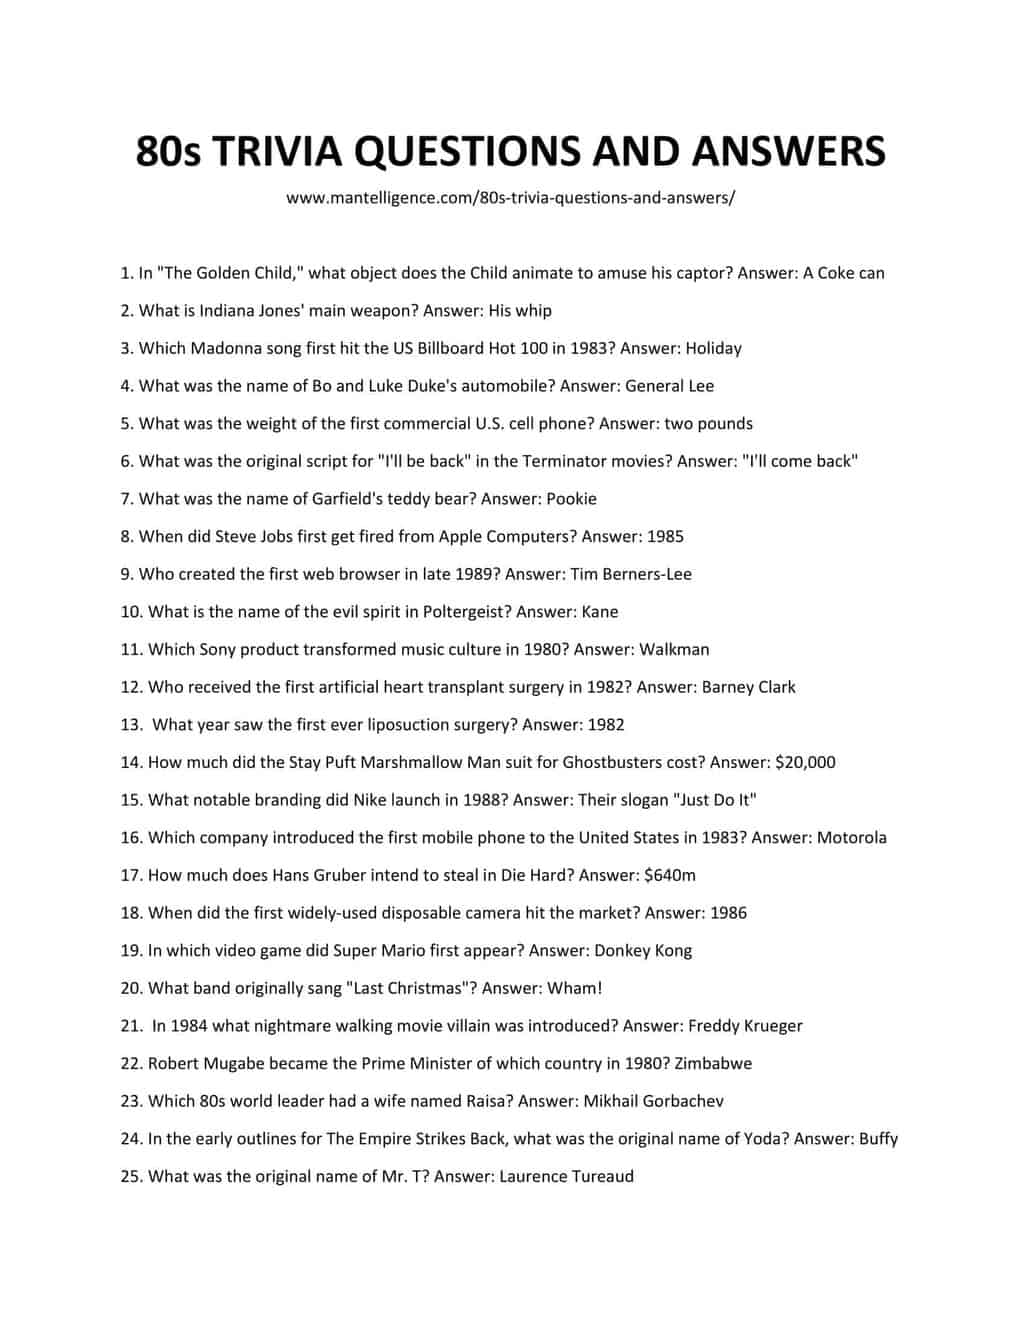 82-best-80s-trivia-questions-and-answers-this-is-the-only-list-you-ll